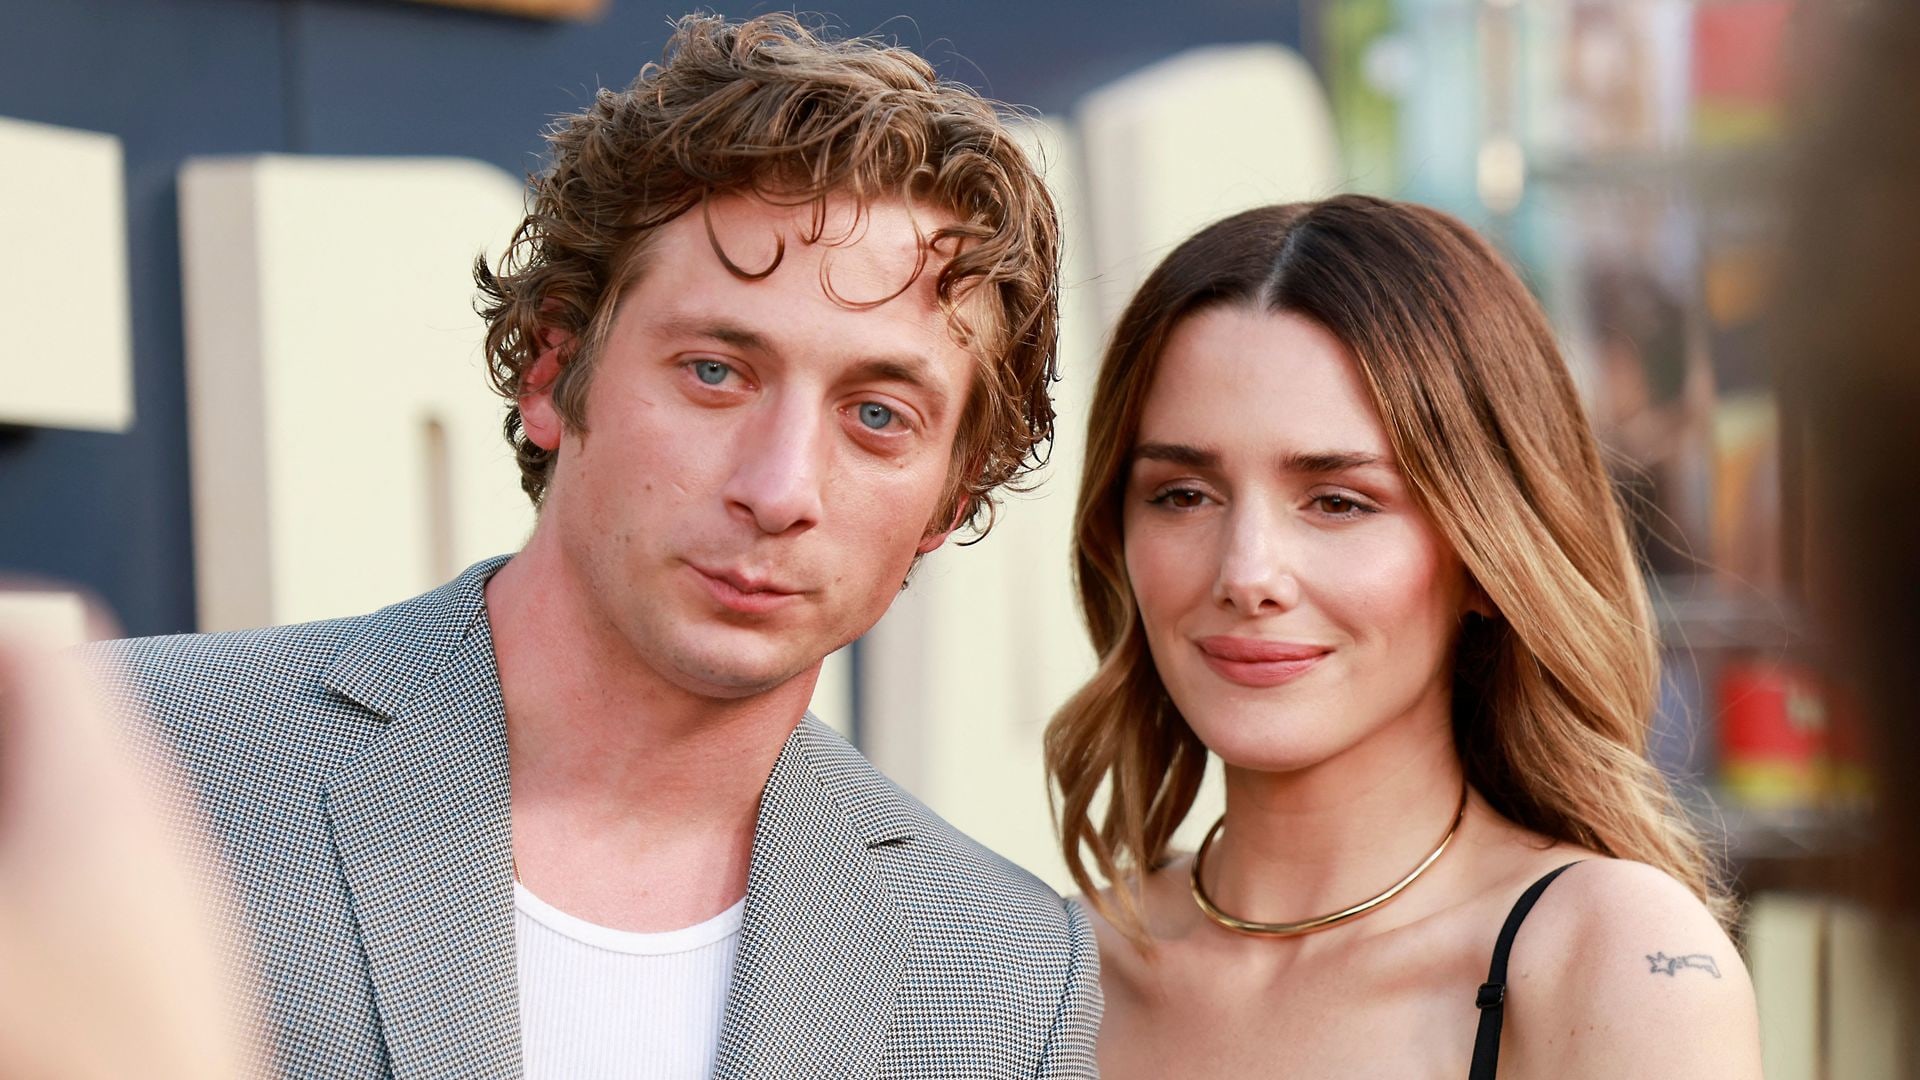 US actor Jeremy Allen White and his wife actress Addison Timlin arrive to the Los Angeles premiere of  FX's "The Bear" held at Goya Studios on June 20, 2022 in Los Angeles, California